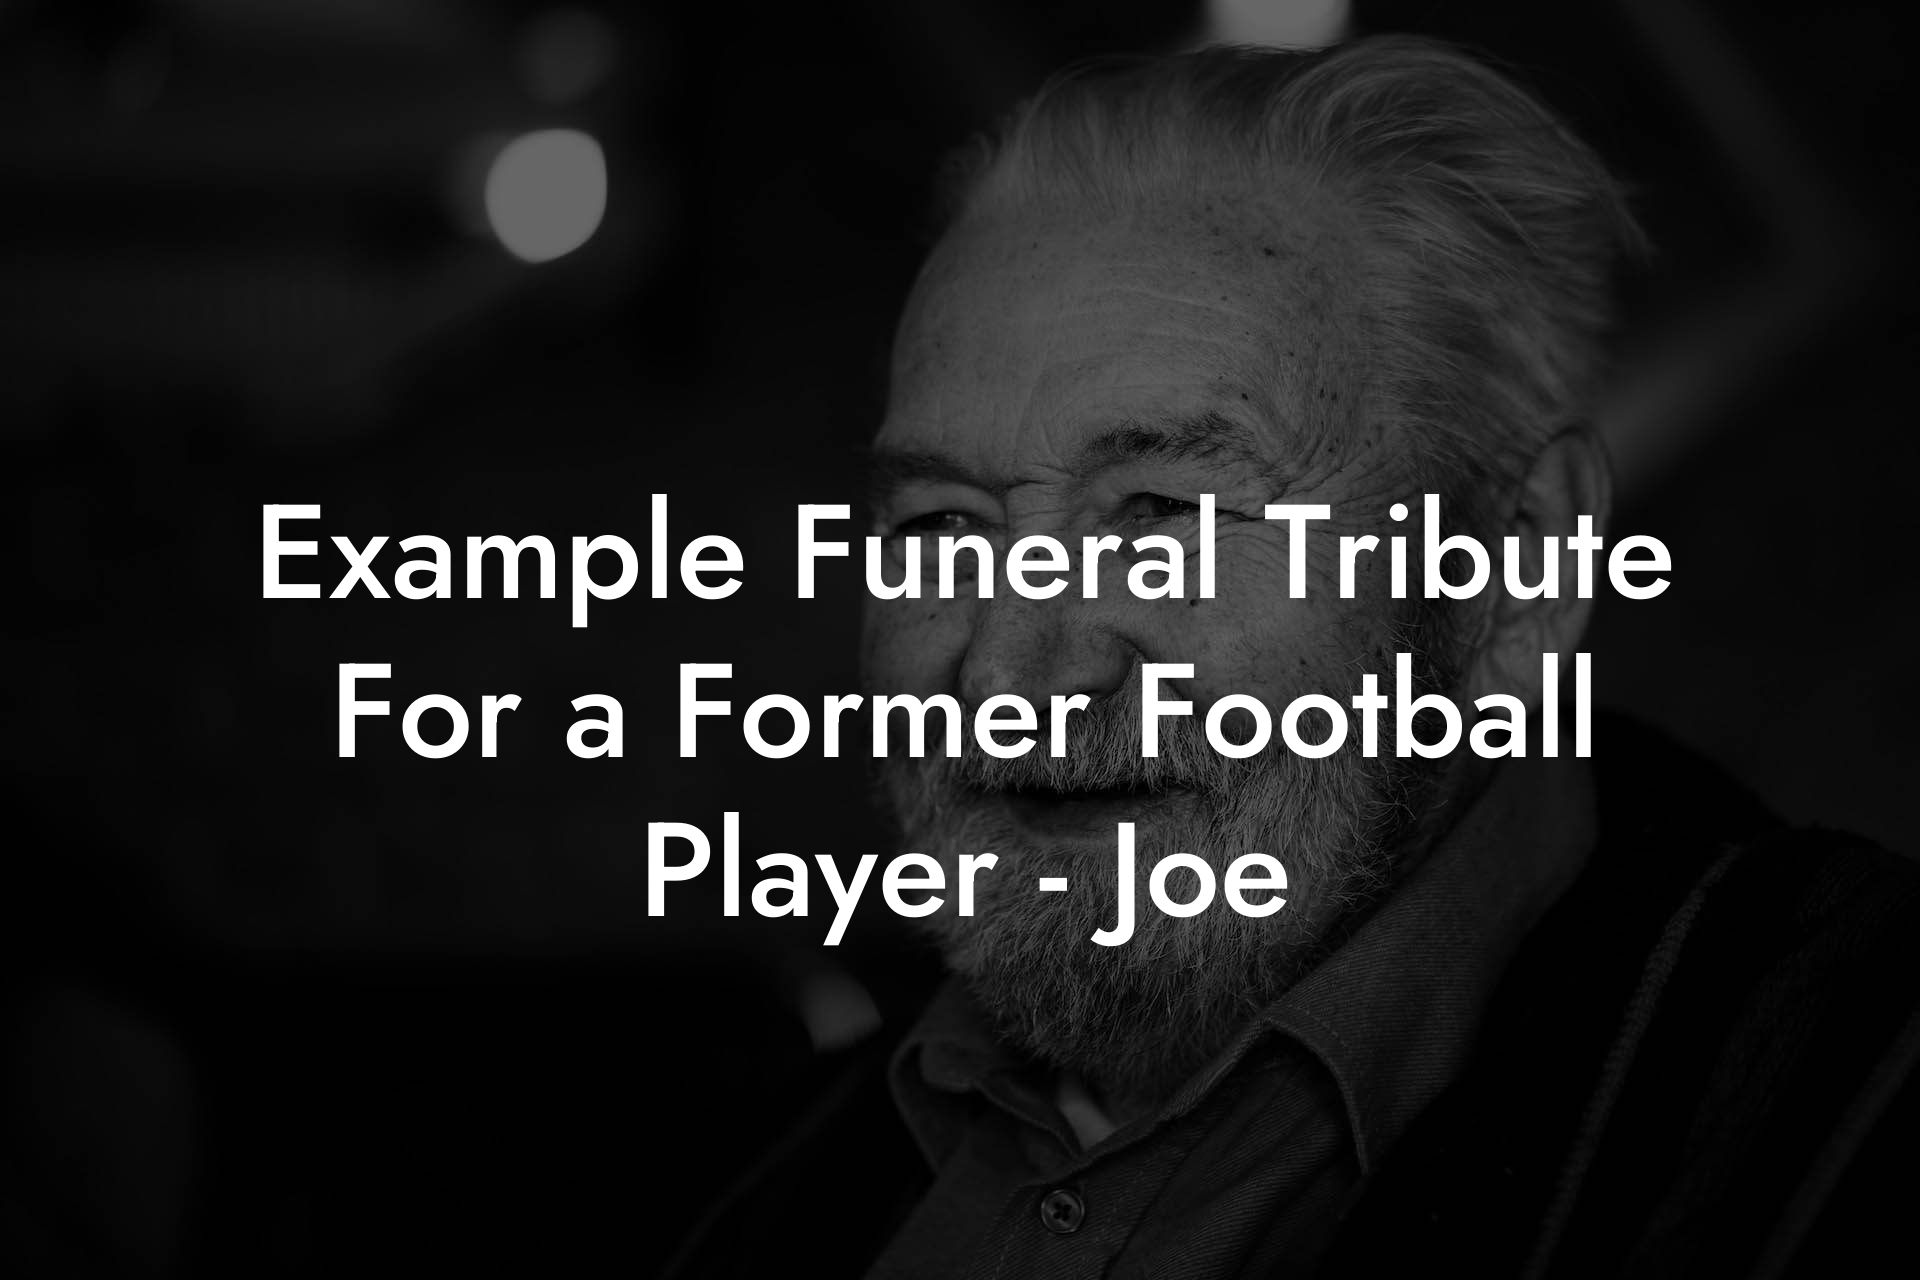 Example Funeral Tribute For a Former Football Player - Joe